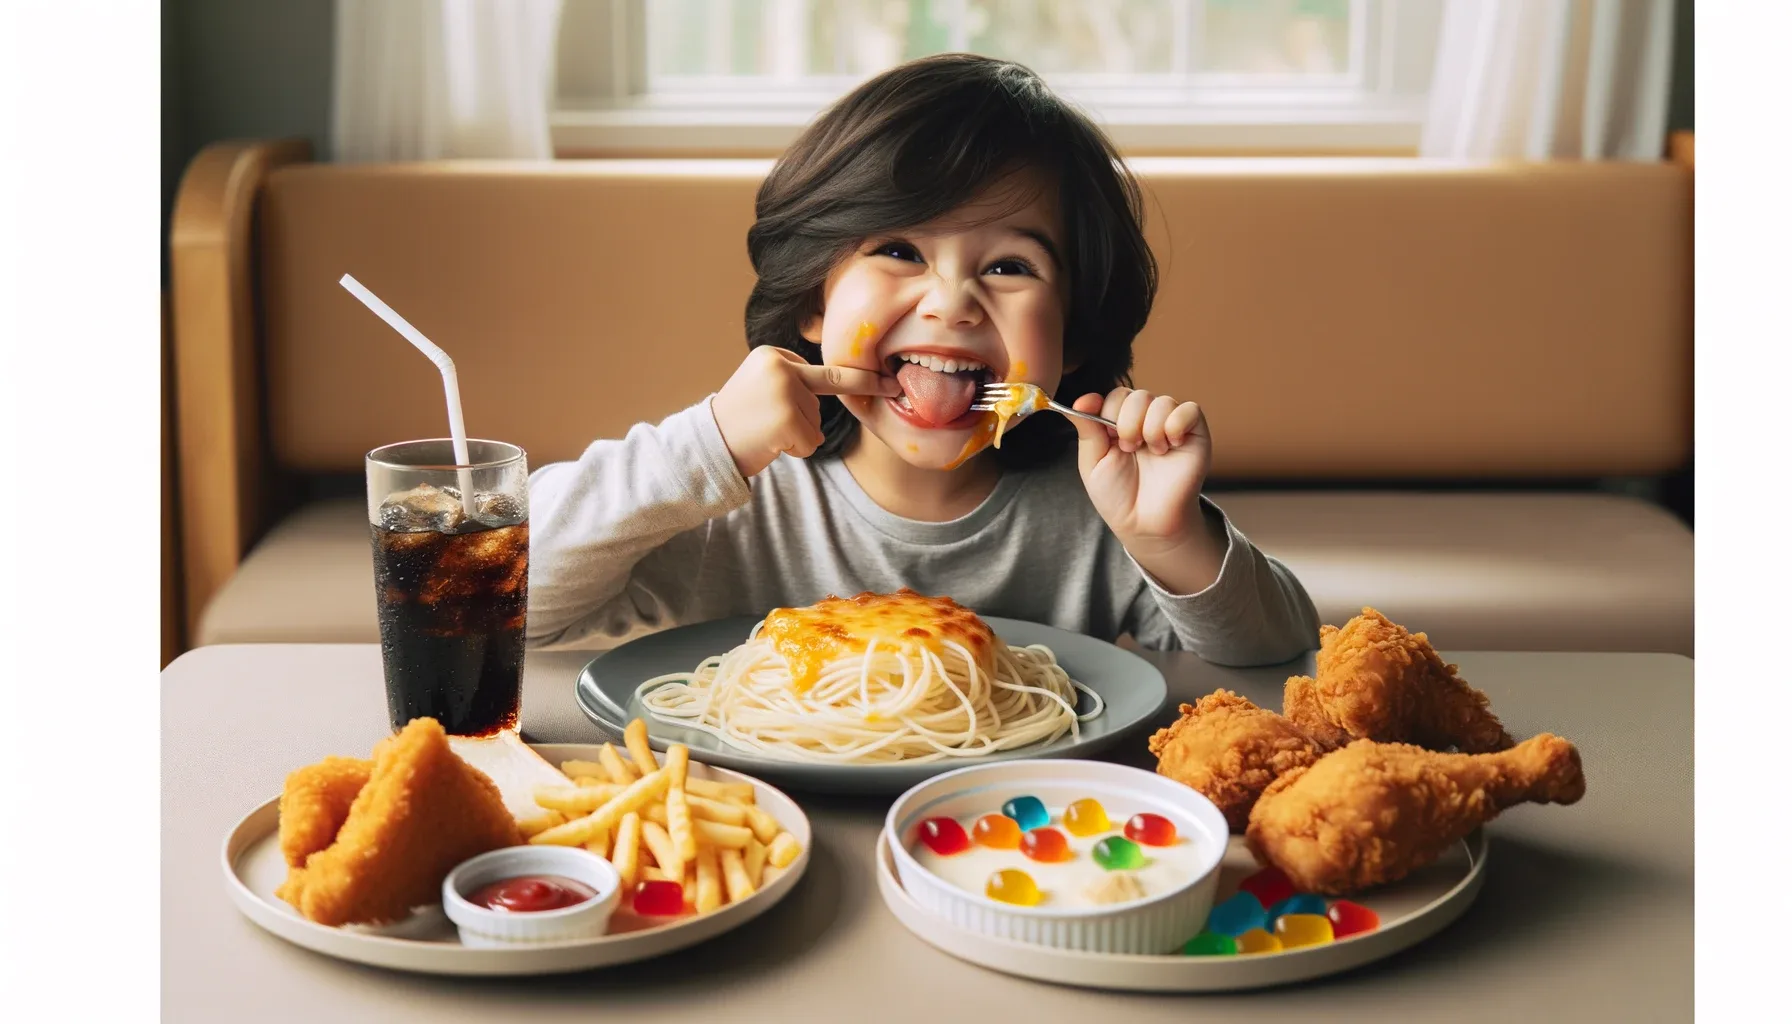 A happy kid is enjoying his lunch of spaghetti with melted cheese, fried chicken, french fries, gummy. bear candies and cola.